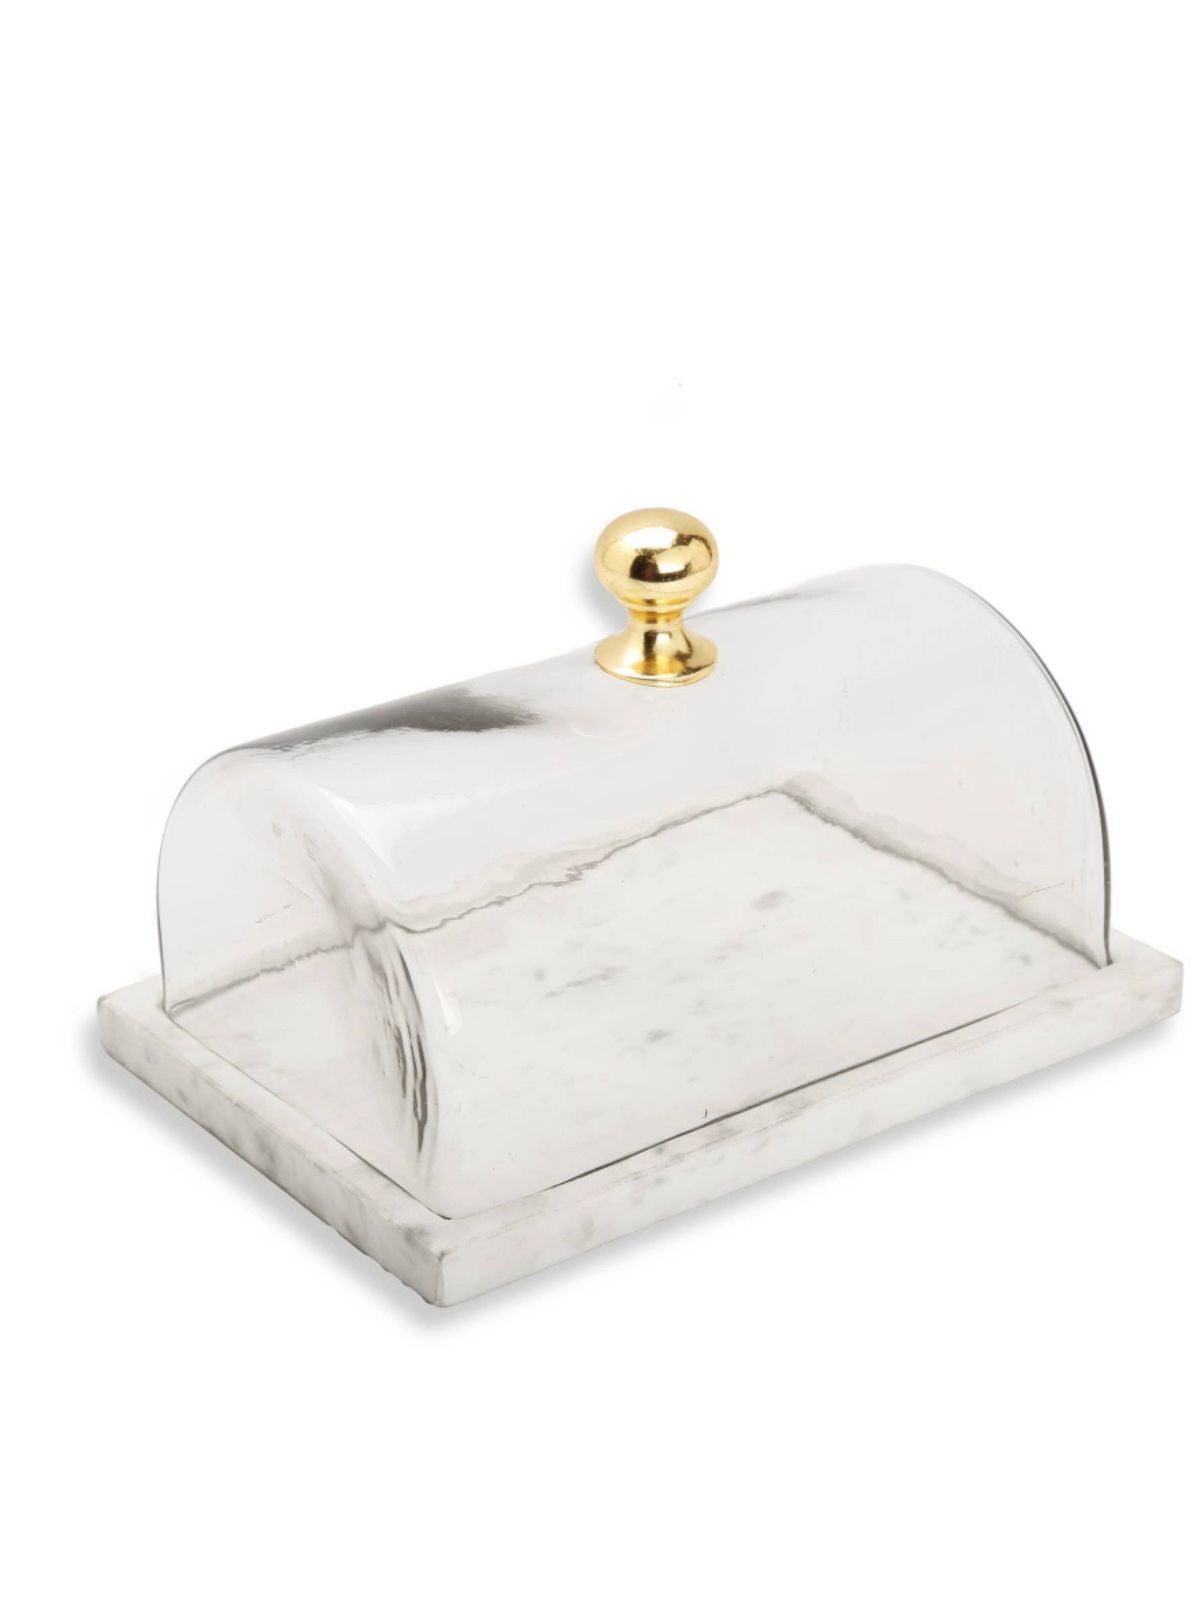 White Marble Cake Tray with Glass Dome and Gold Knob Sold by KYA Home Decor, 10L x 6W.